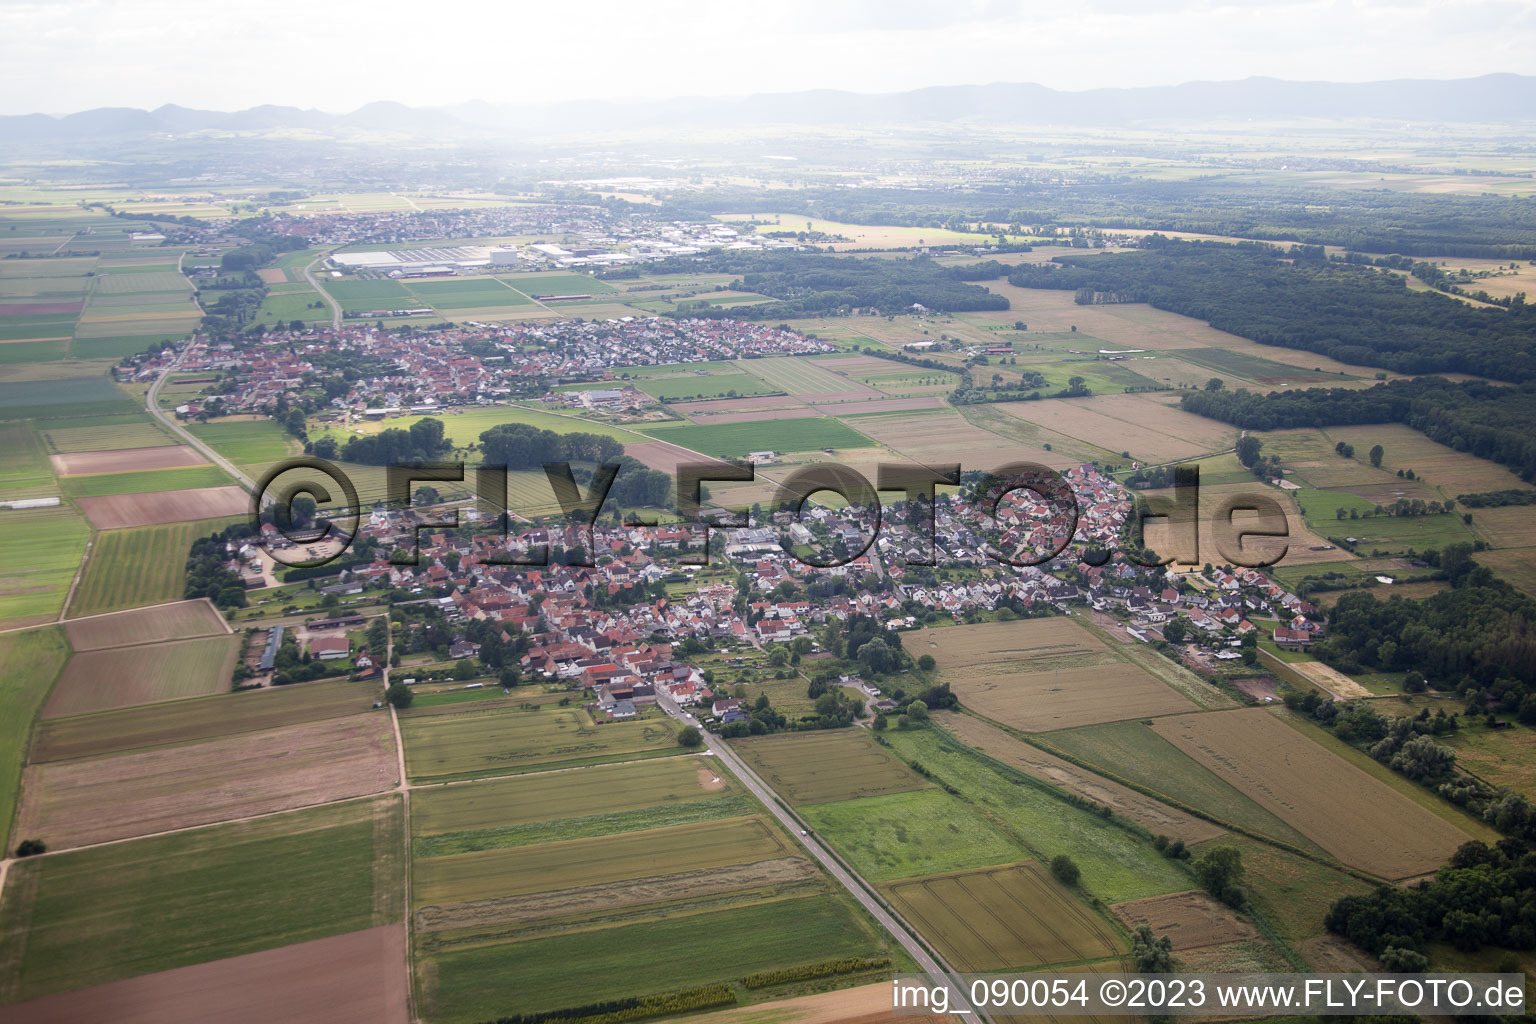 Knittelsheim in the state Rhineland-Palatinate, Germany from above